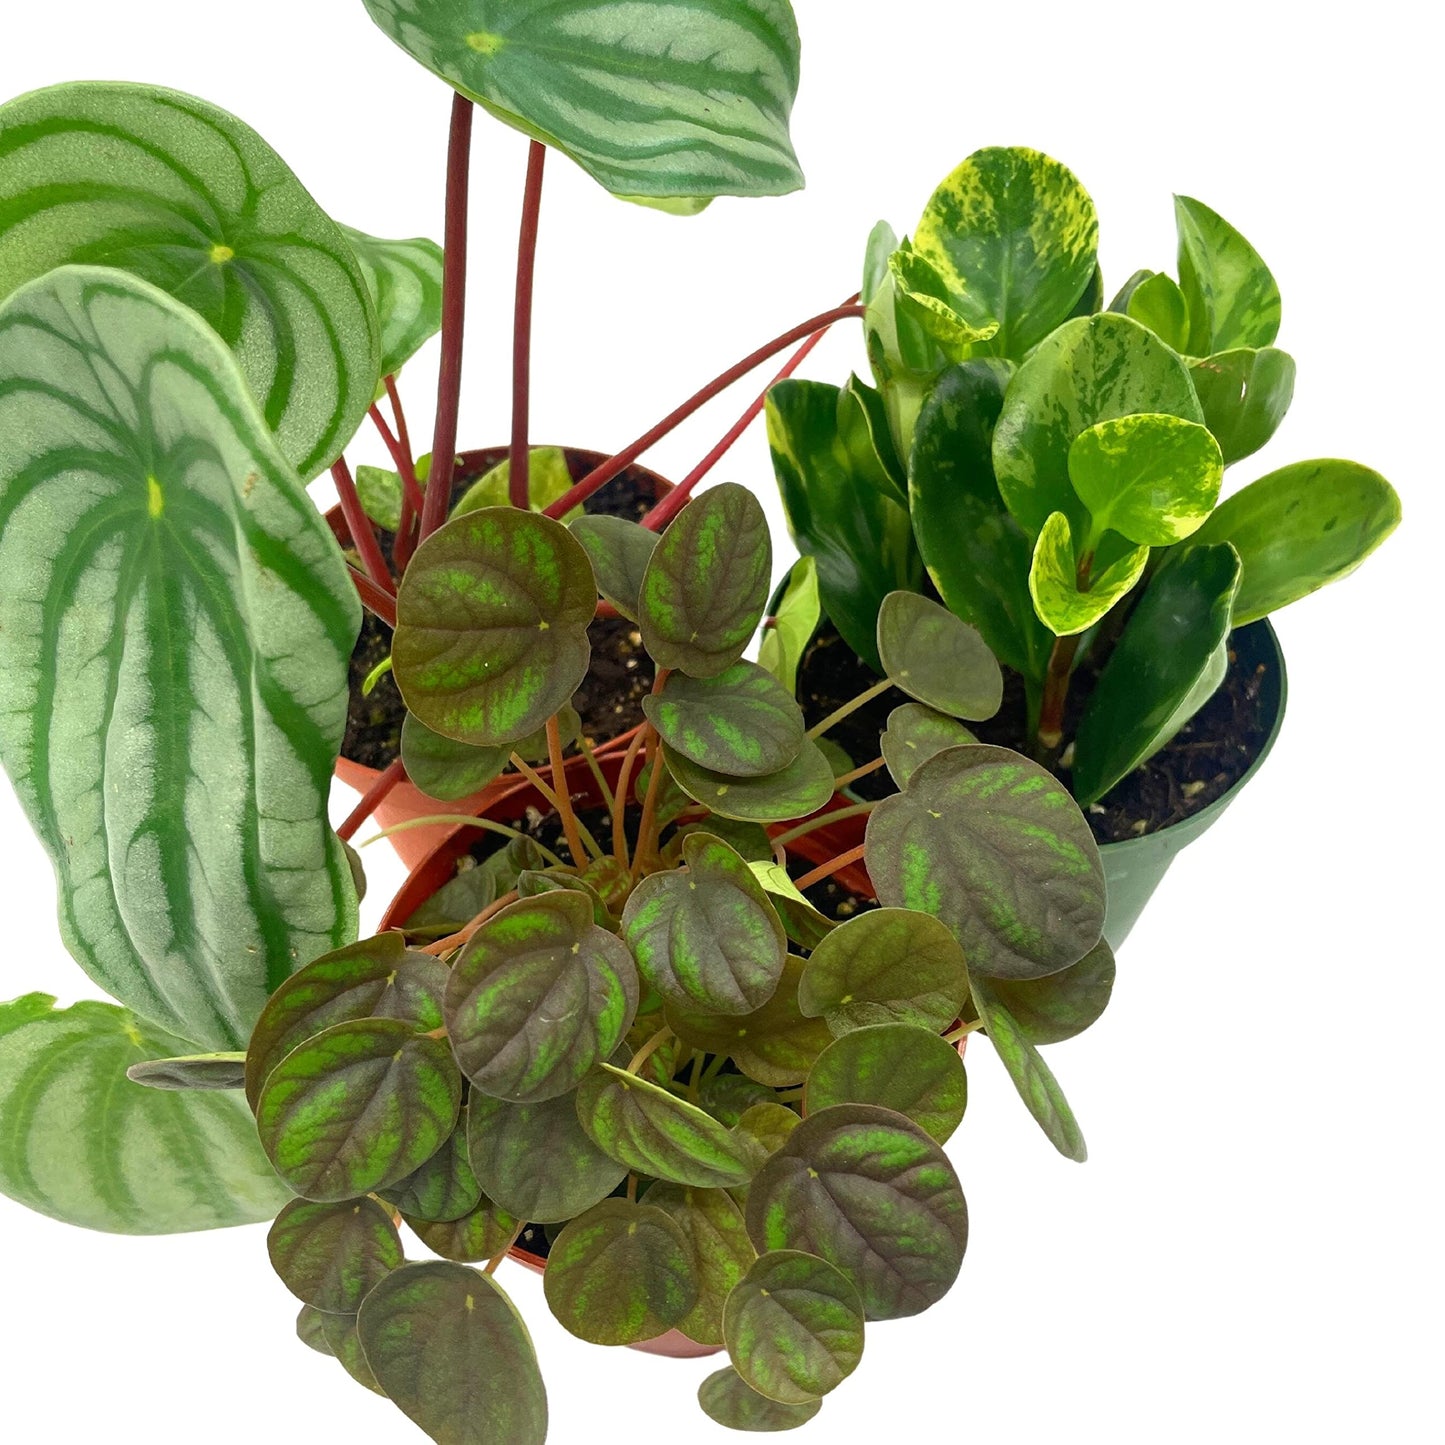 Peperomia Assortment Set, 4 inch pots, Set of 3, Watermelon, Marble, Ripple, Rosso, peppermill, Quito, Variety Assorted Collection